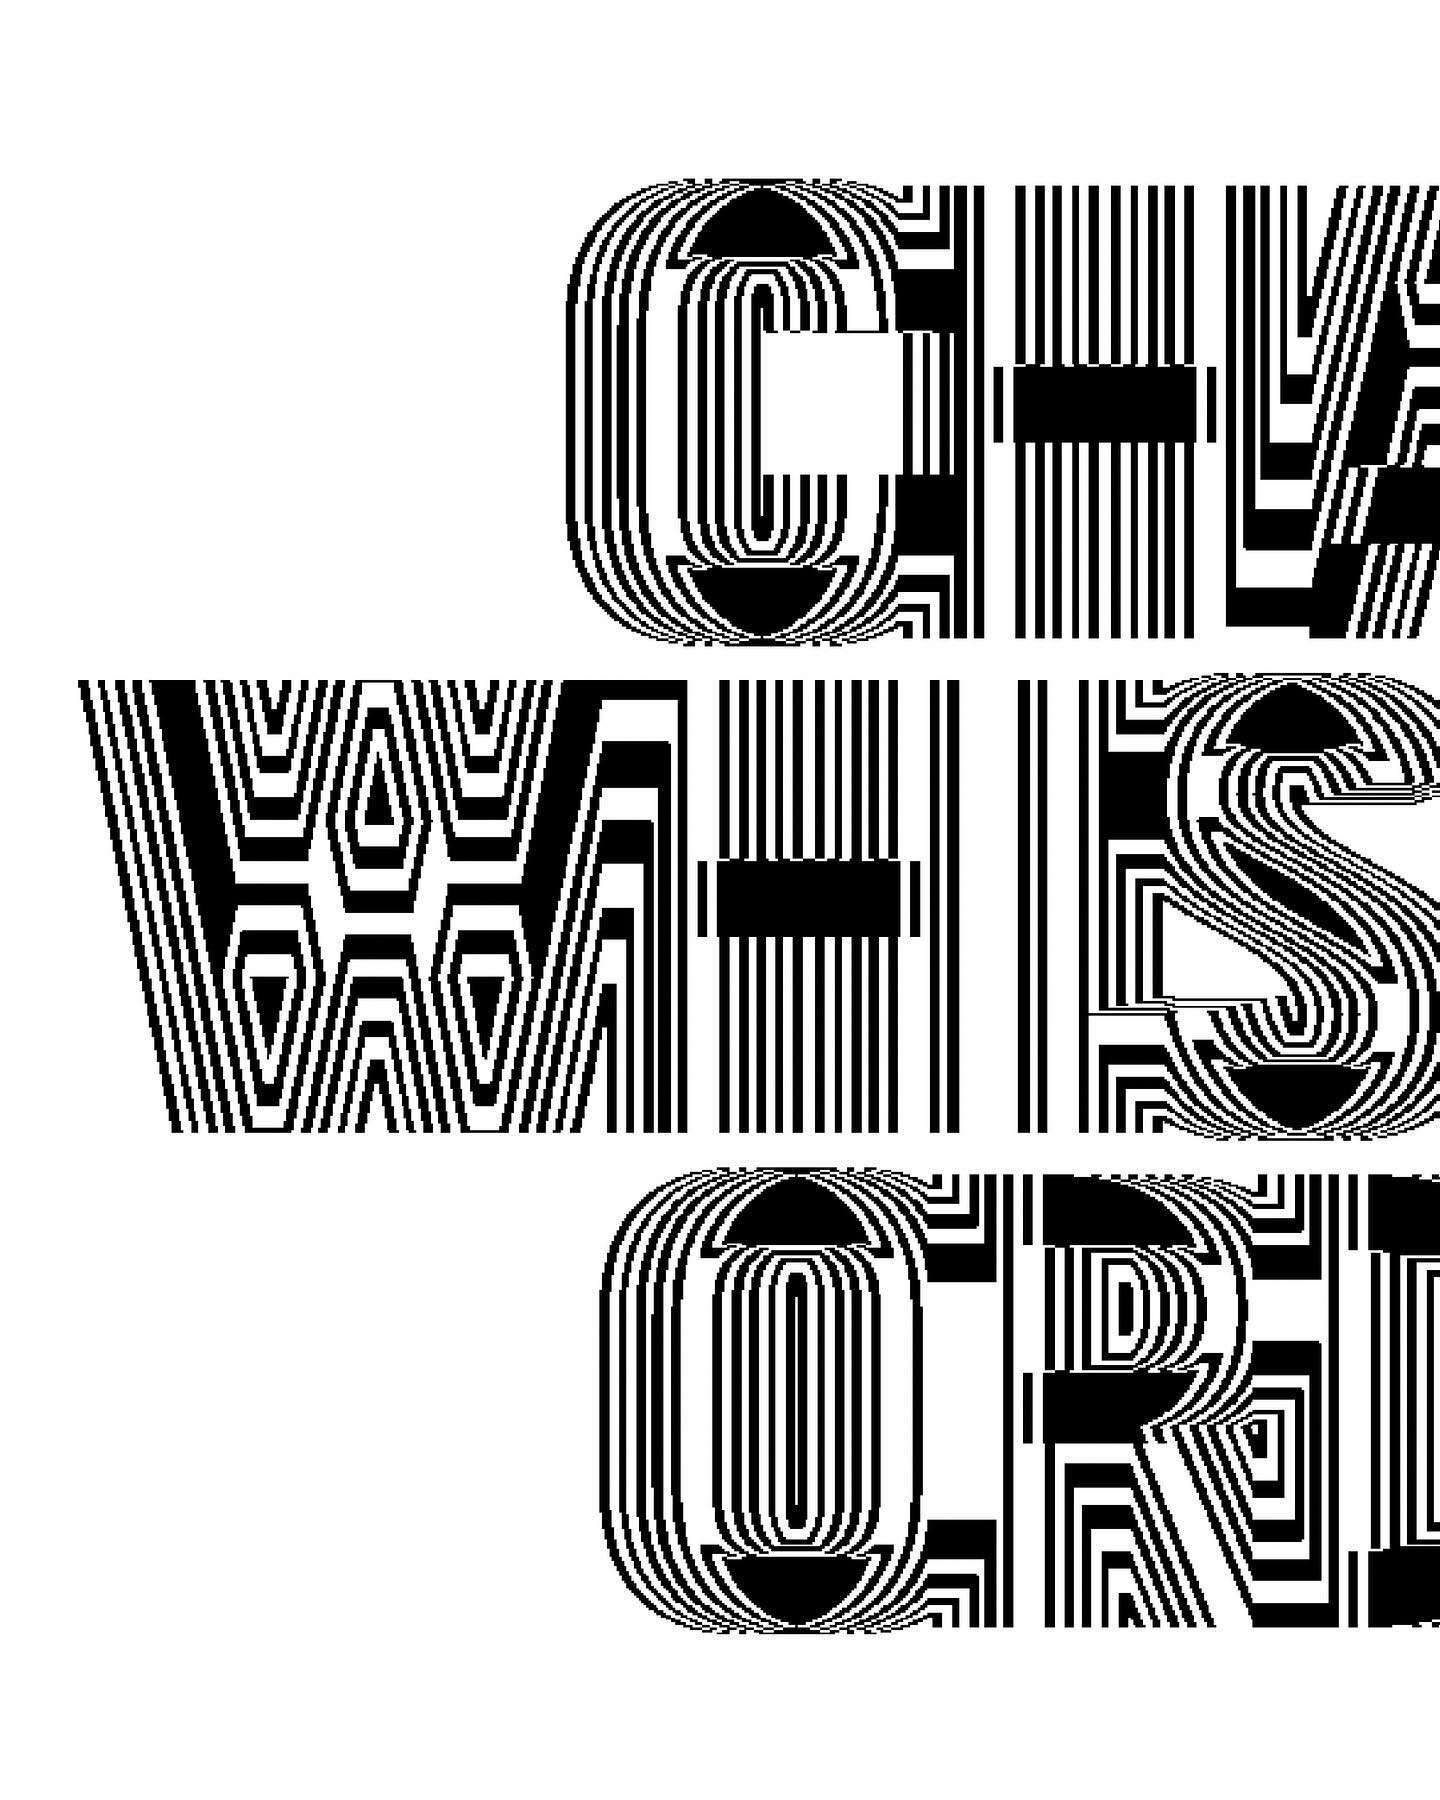 Typography lettering exploration
👨&zwj;💻👨&zwj;💻👨&zwj;💻
🖨️🖨️🖨️
IA says: A possible rationale for the phrase &quot;Chaos whispers order&quot; could be that it suggests that even in the midst of chaos and confusion, there is an underlying order